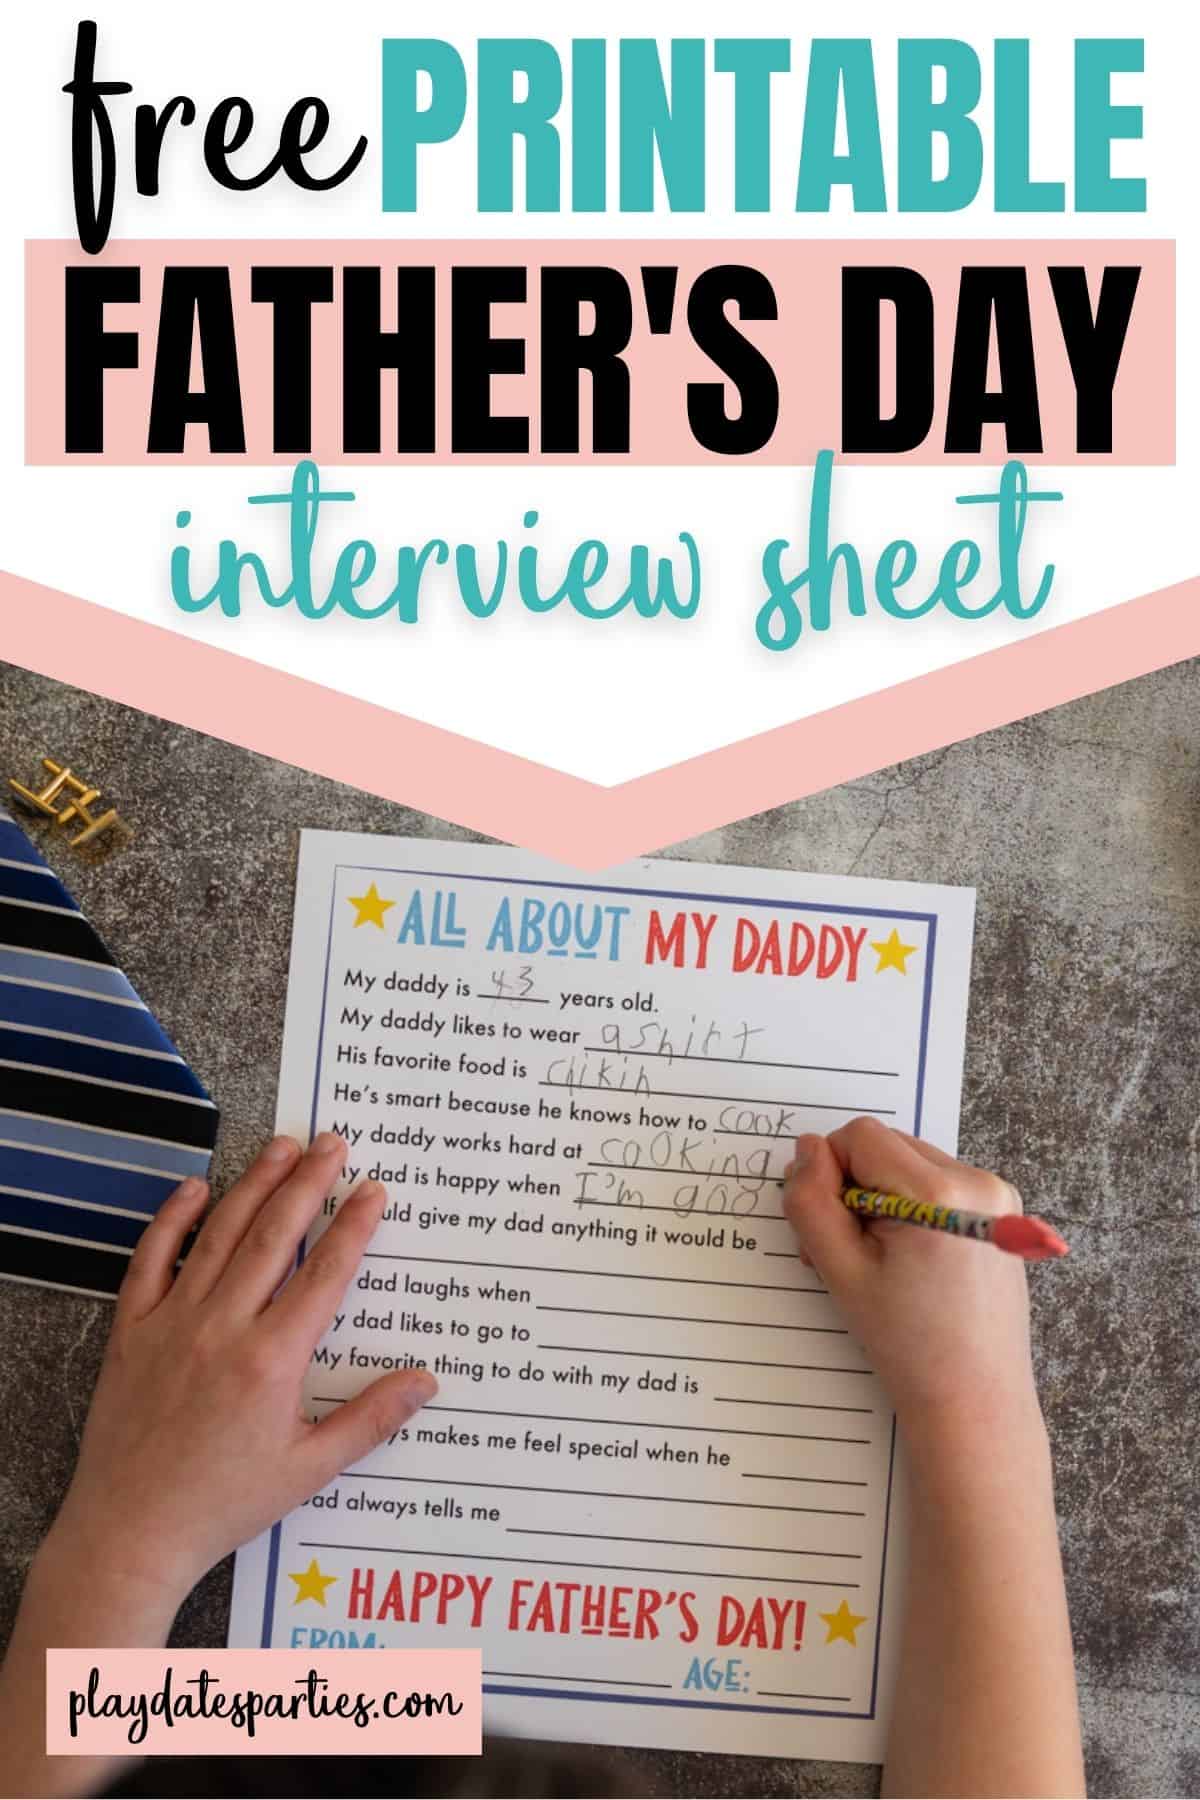 Free printable Father's Day interview sheet.